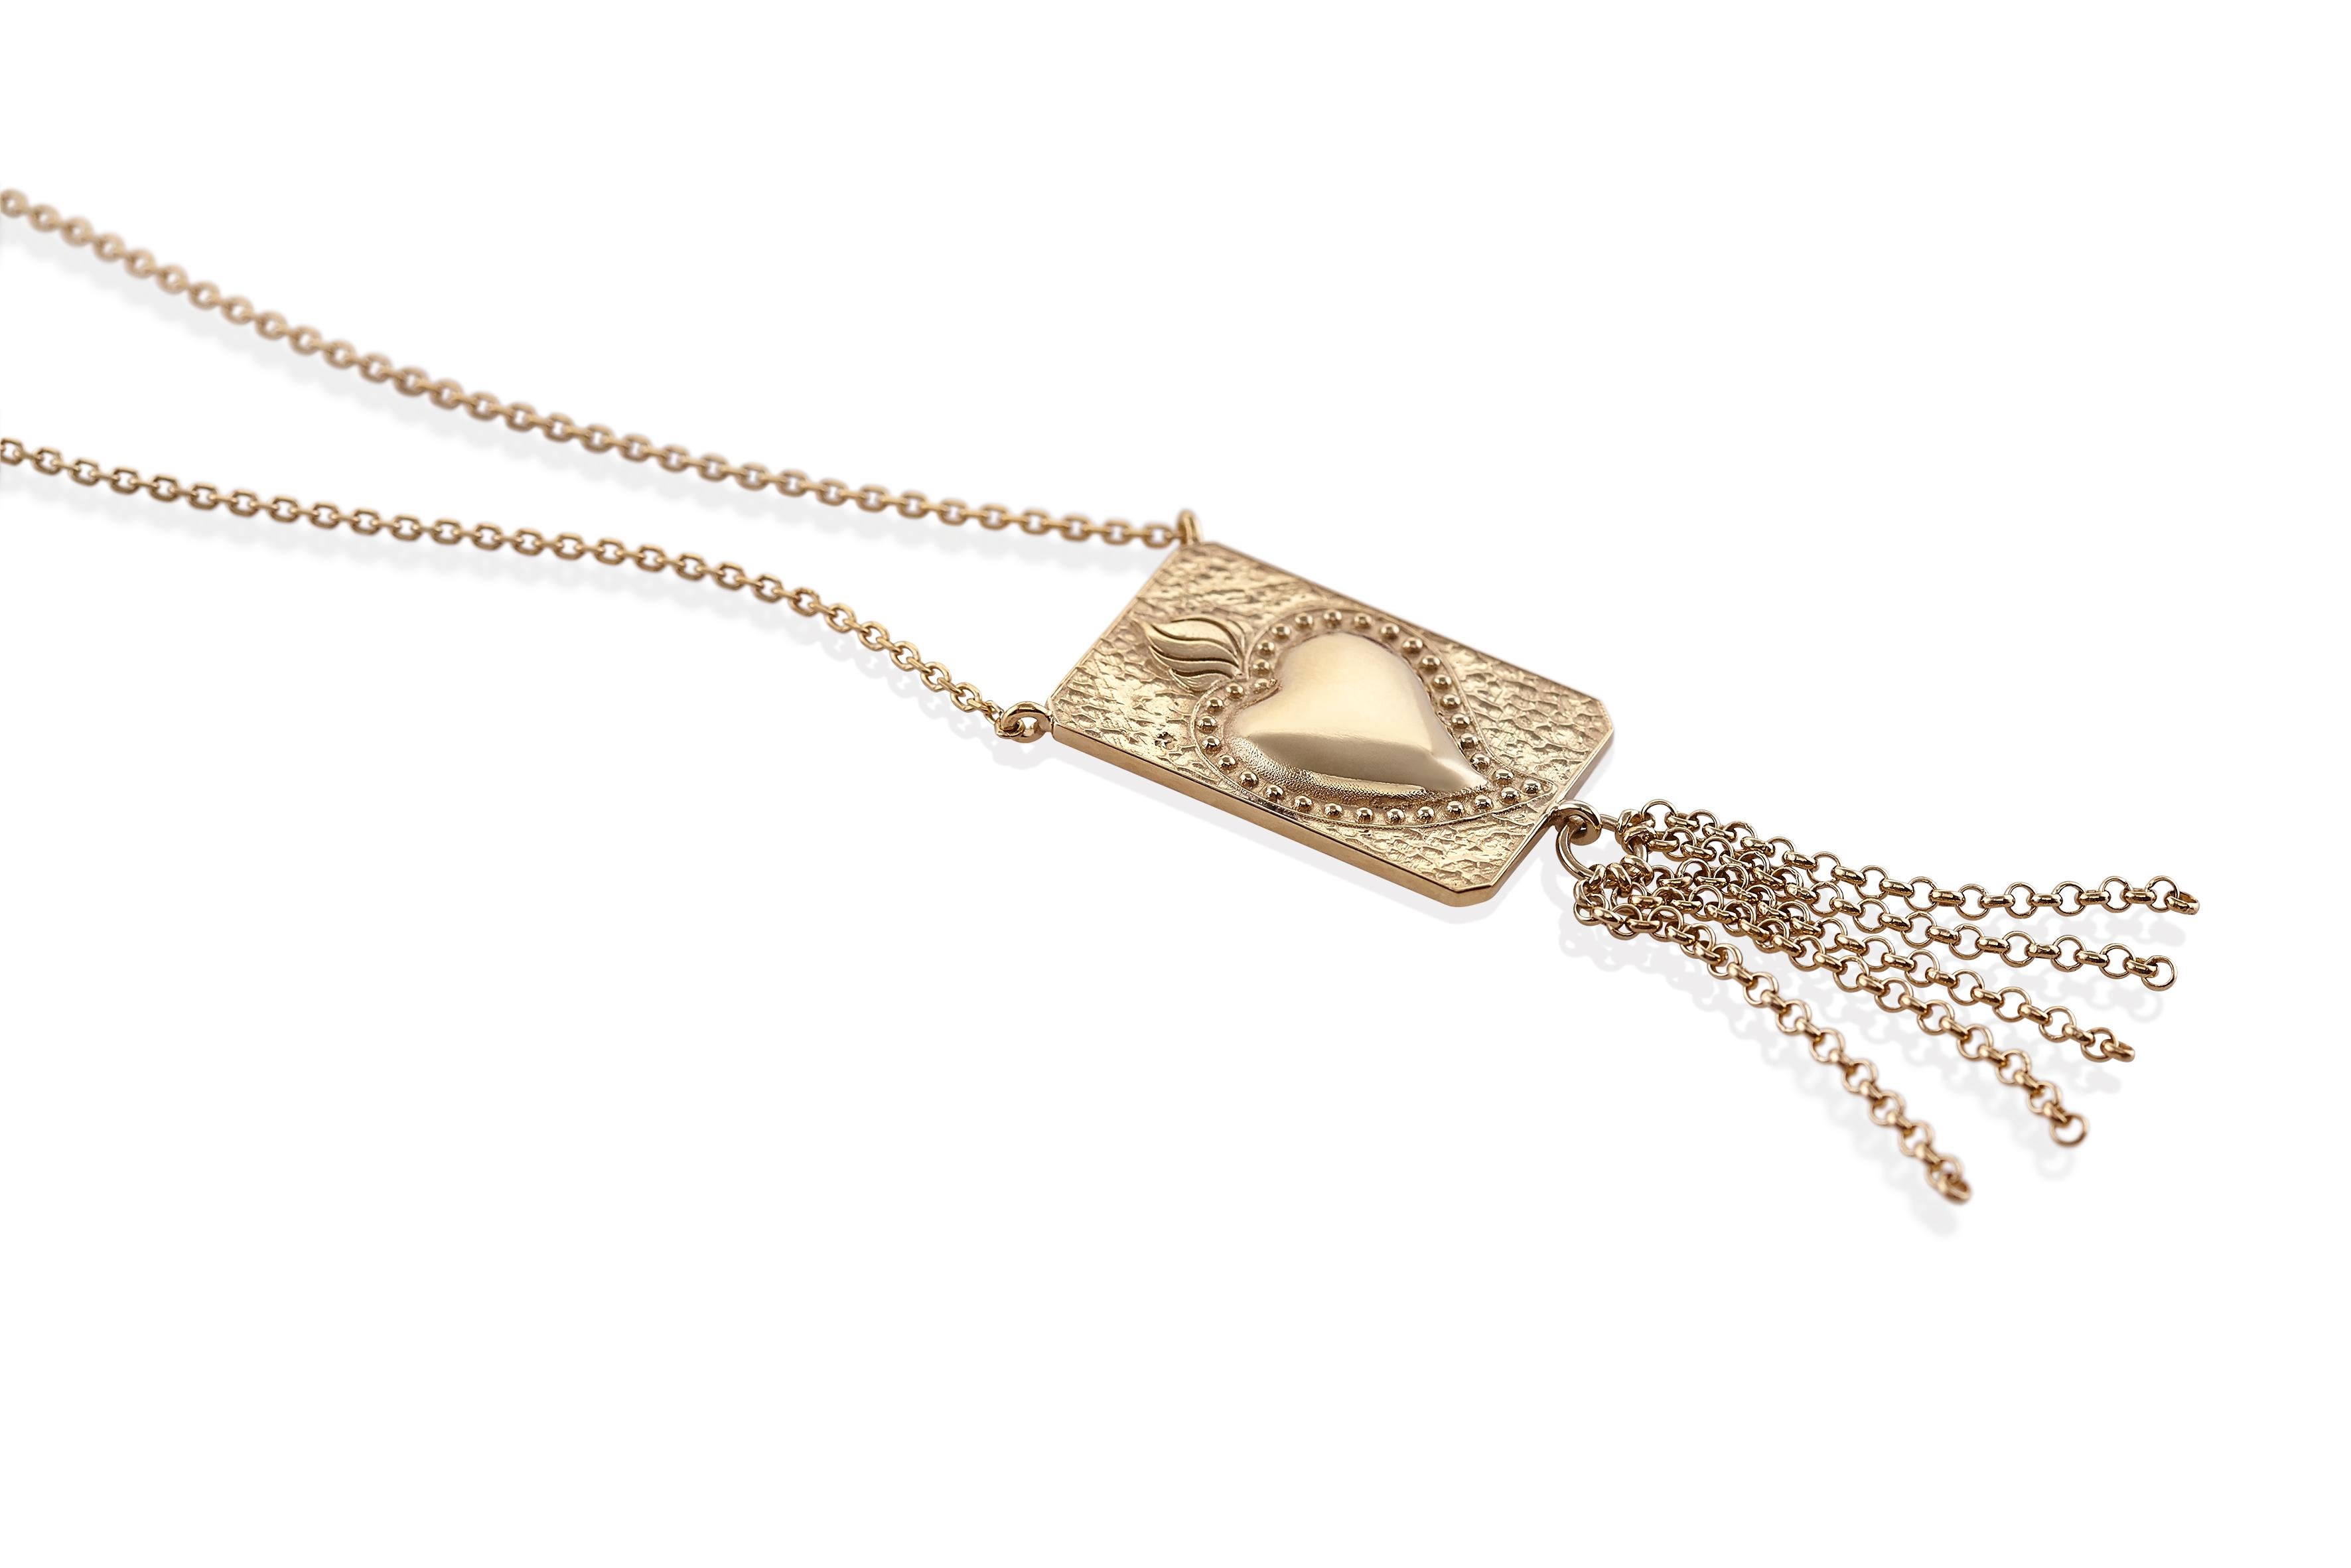 Tama Pendant Necklace with  the Love Burning Sacred Heart, in 14kt Yellow Gold with Tassel
A 